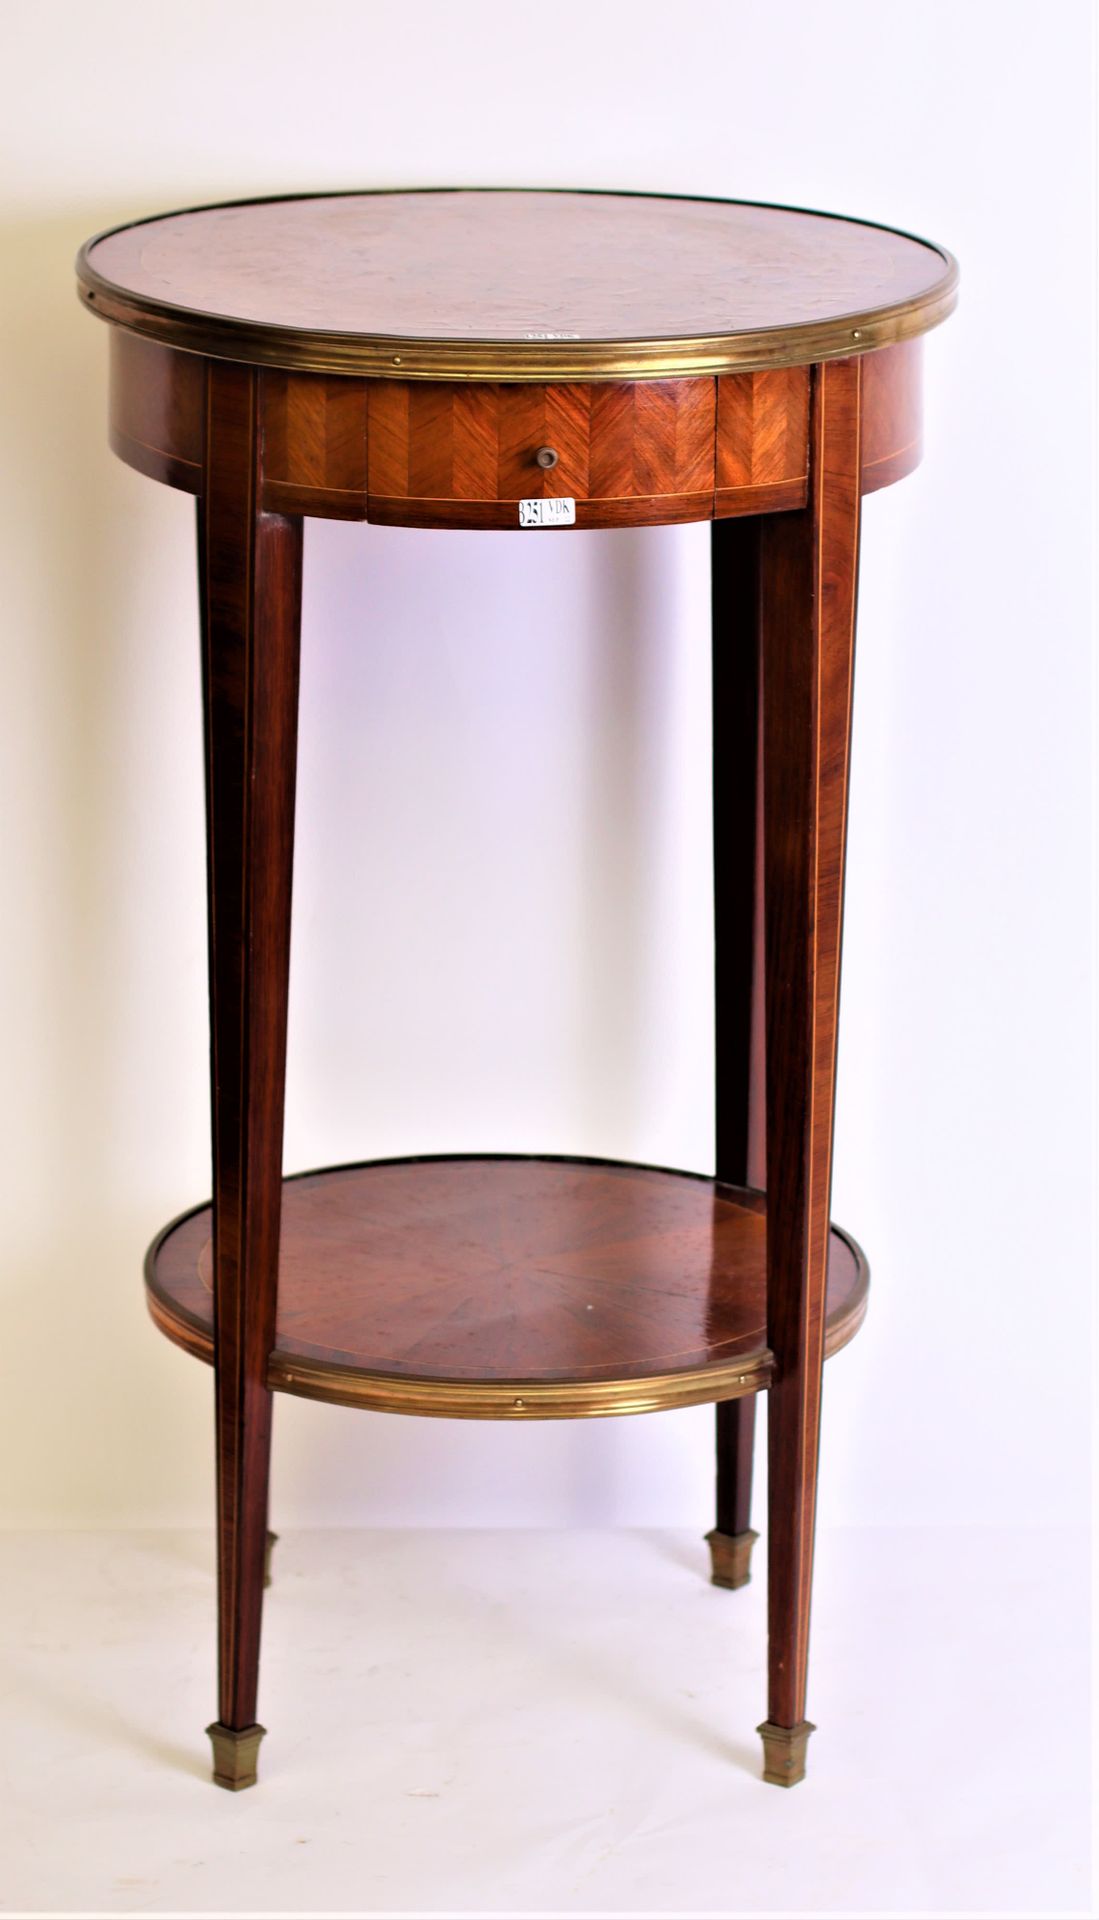 Null Round pedestal table in the Directoire style